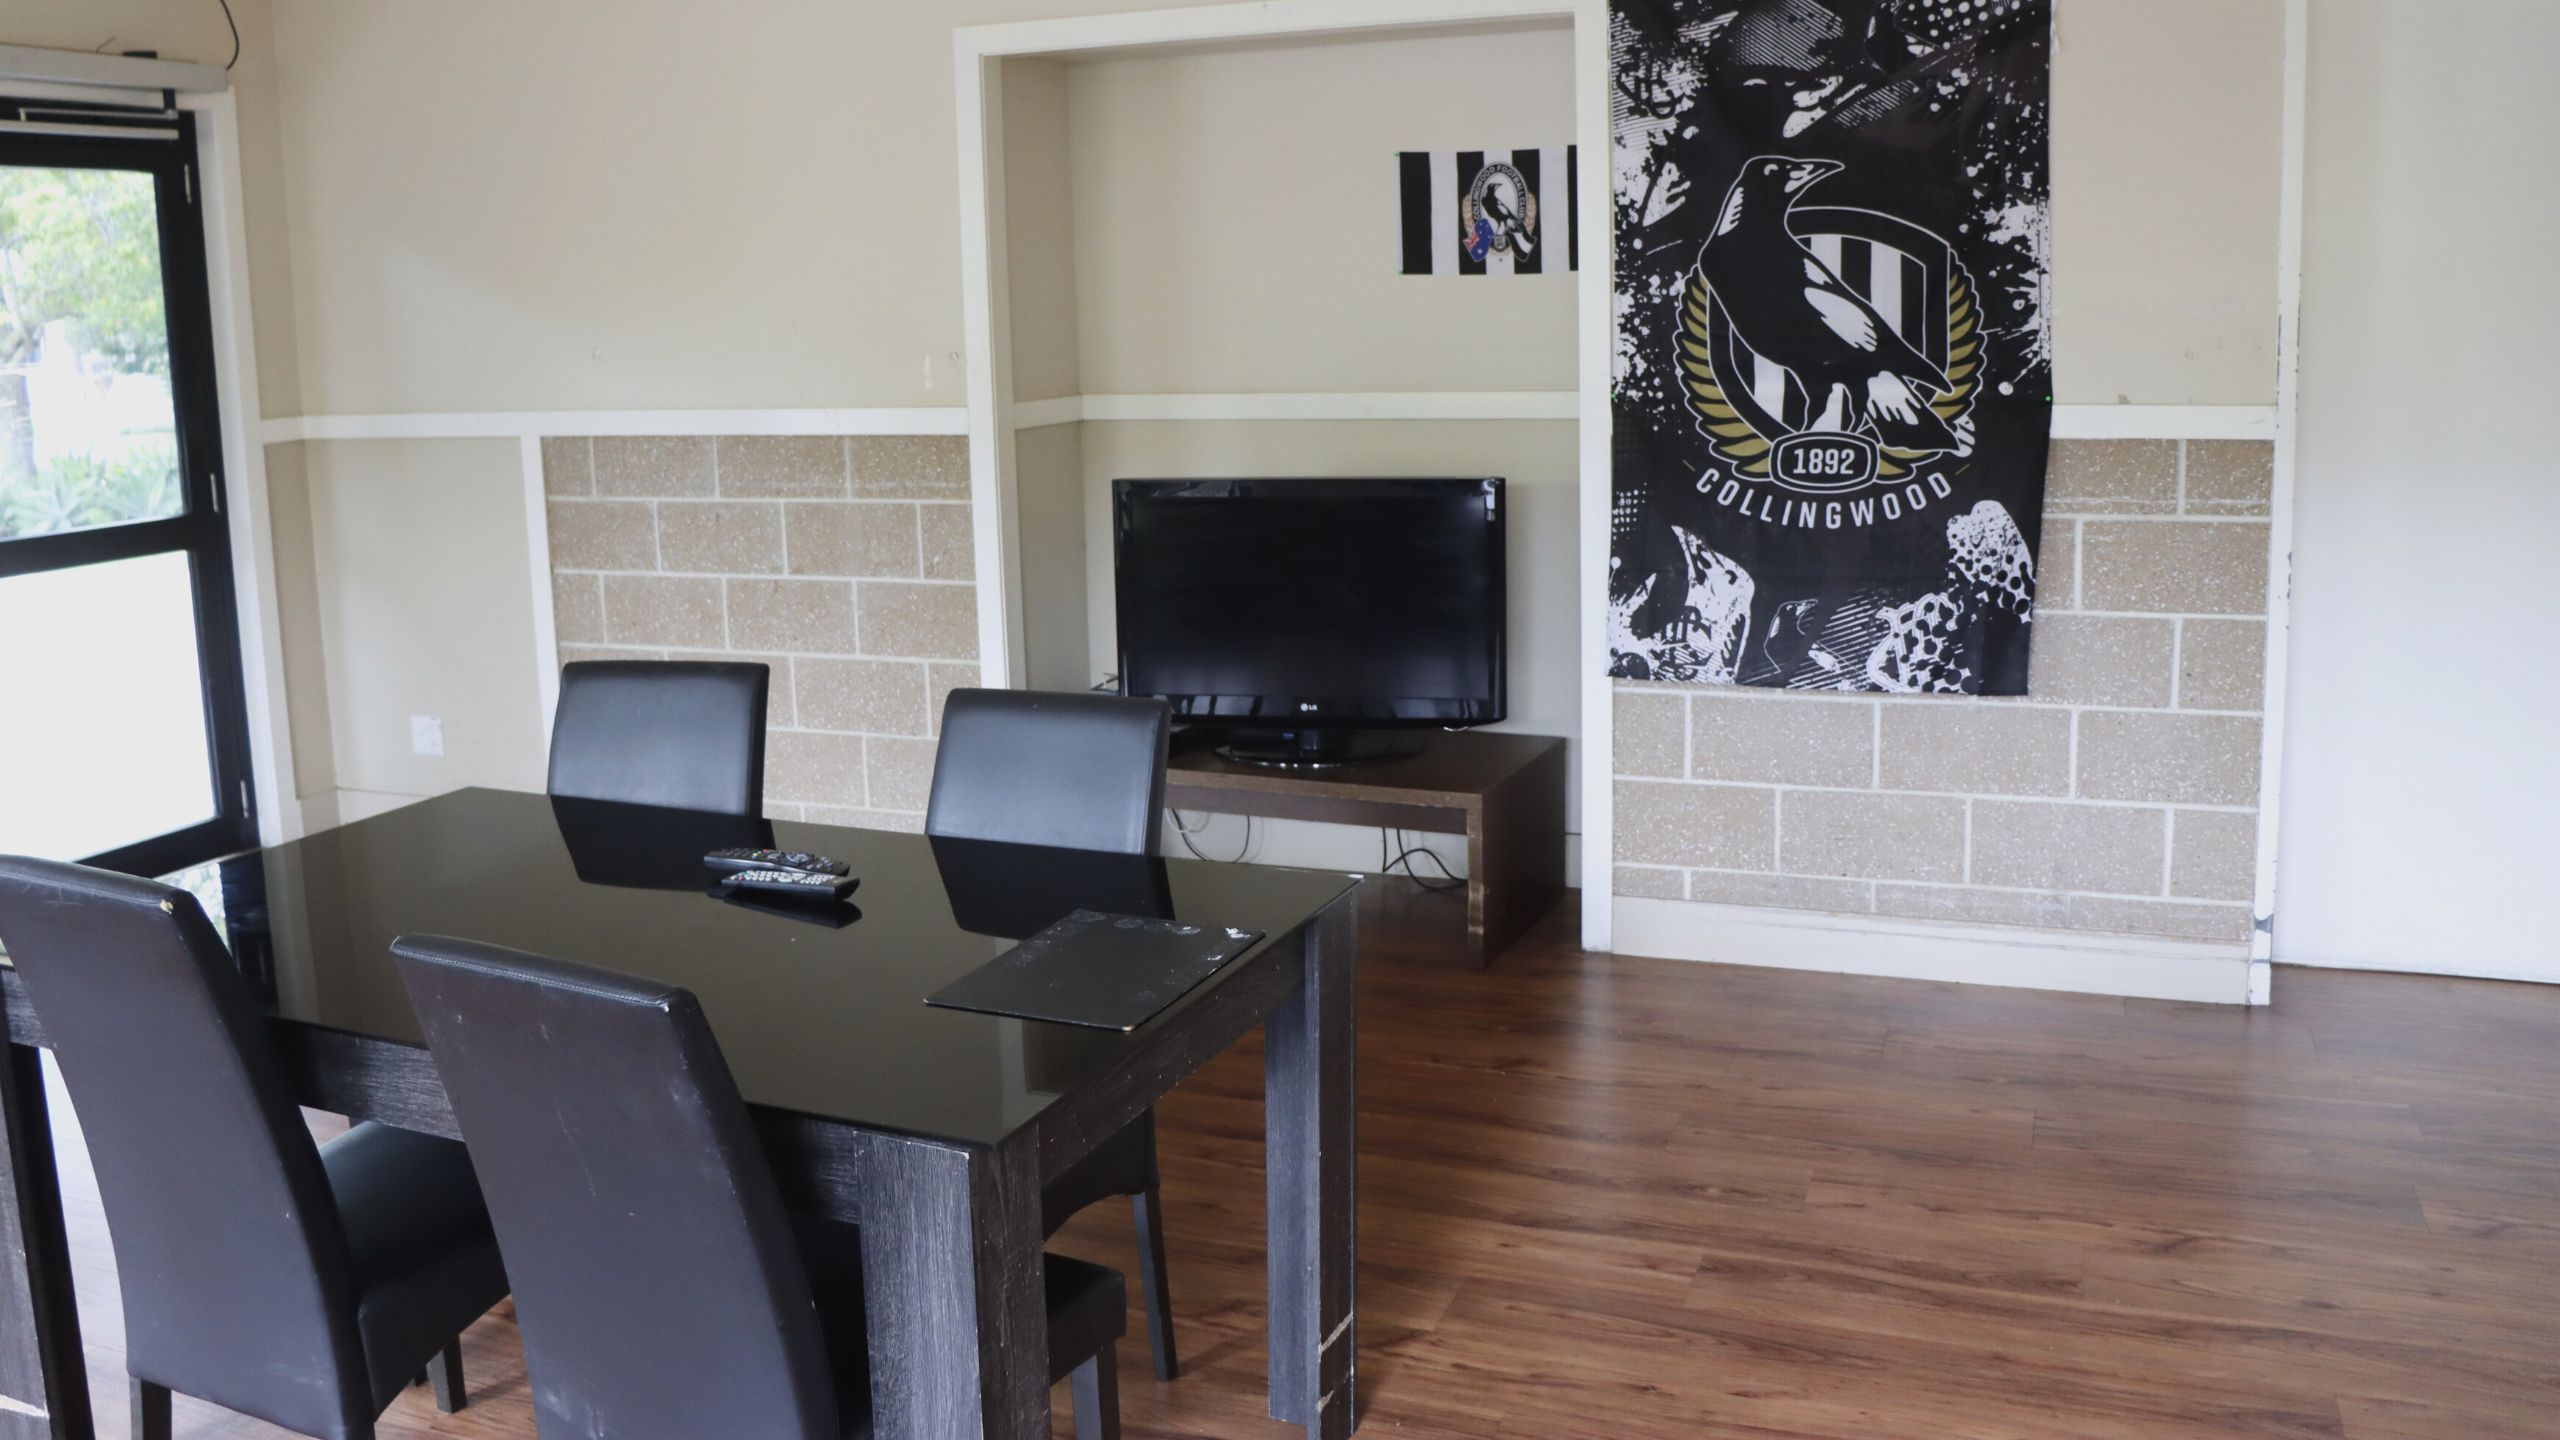 Lounge / dining area with a TV and Collingwood flag in the background